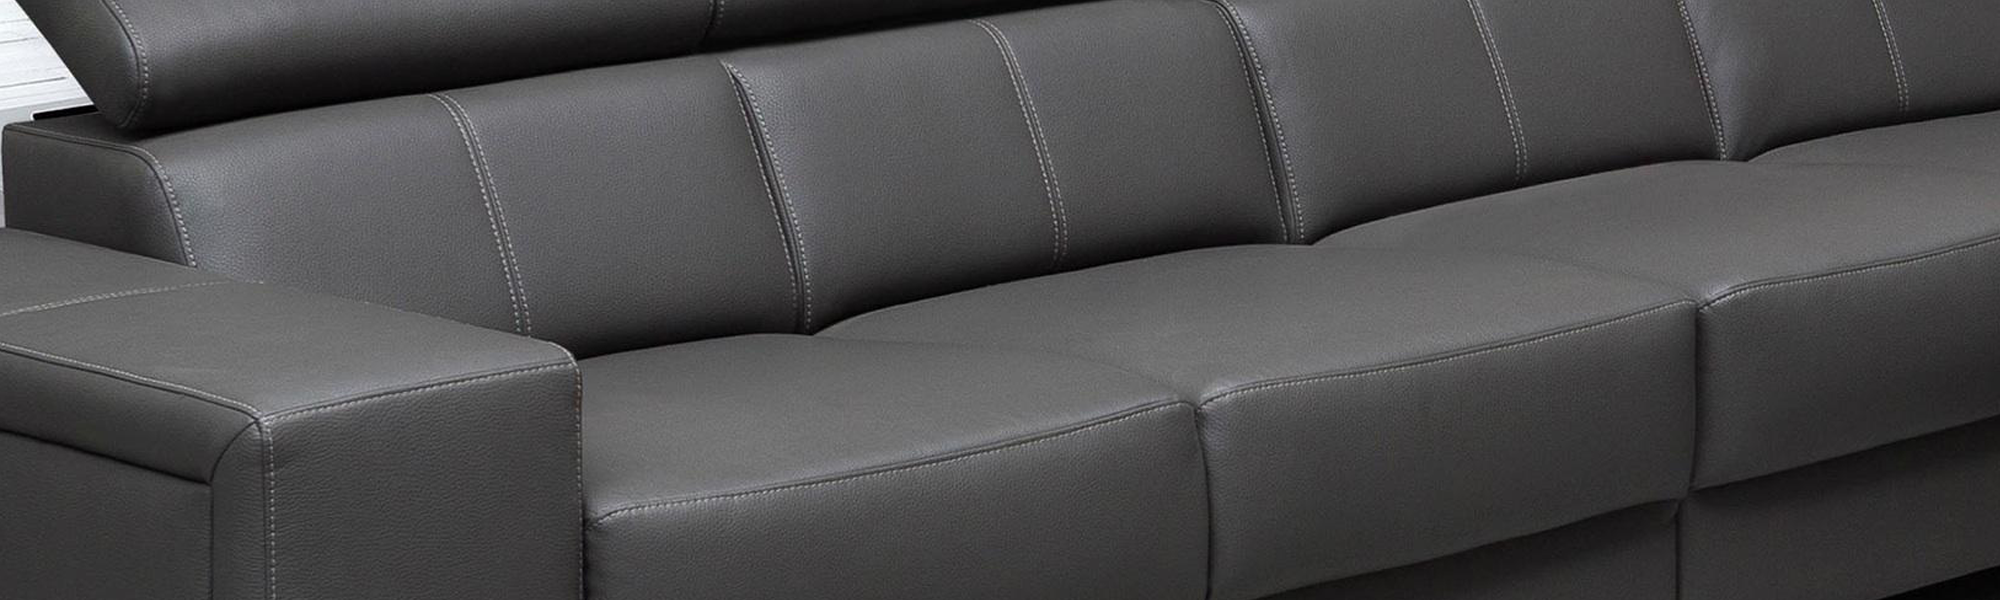 Leather 3 Seater Sofas